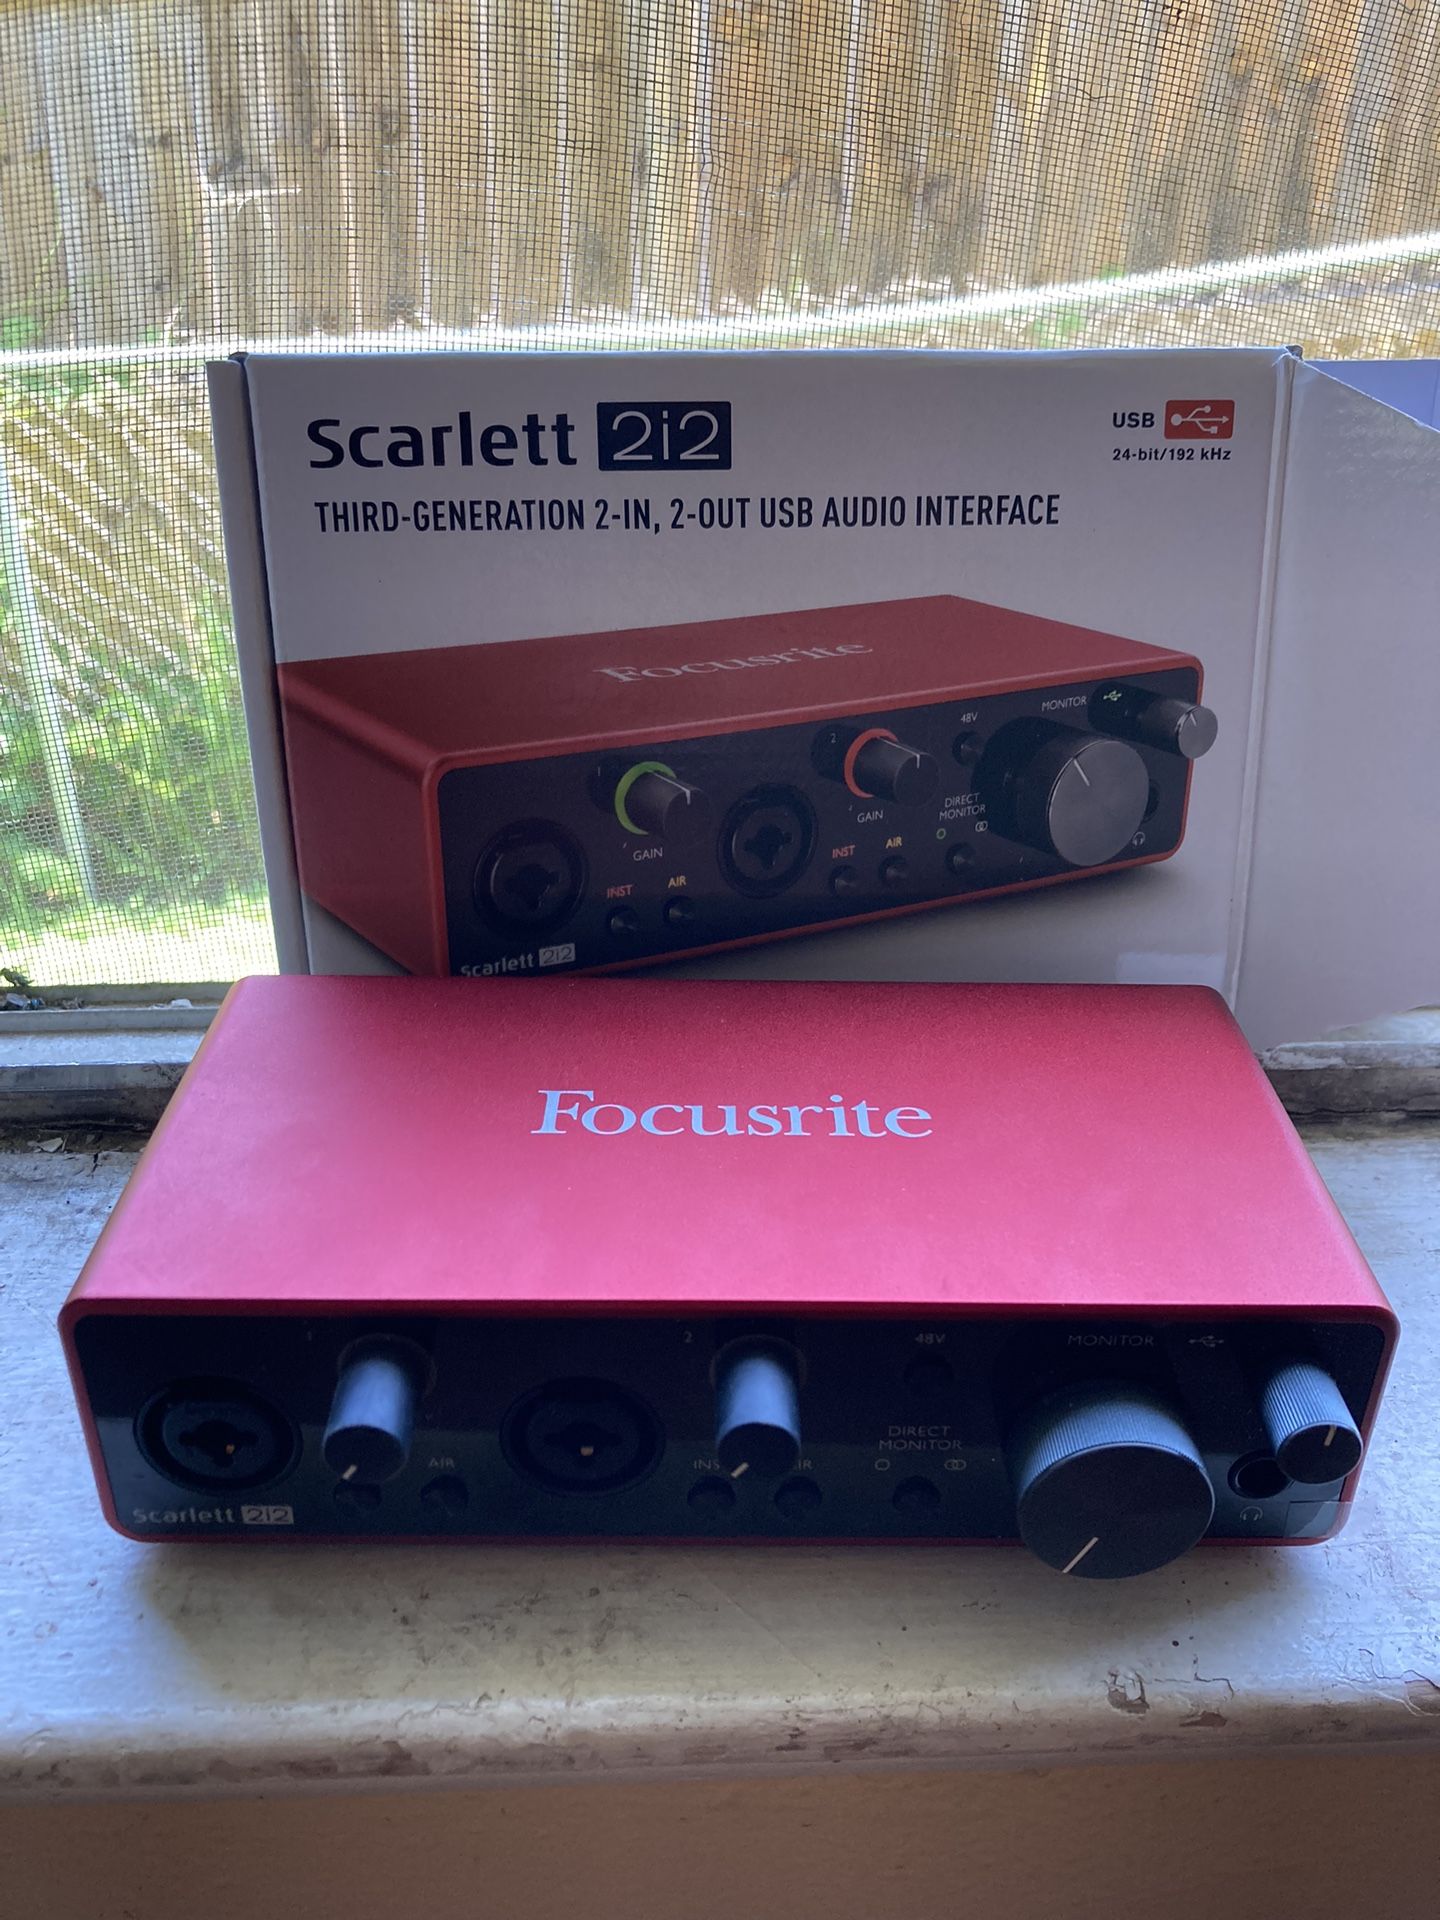 Scarlett 2i2 Third-Generation 2-In, 2-out USB Audio Interface.